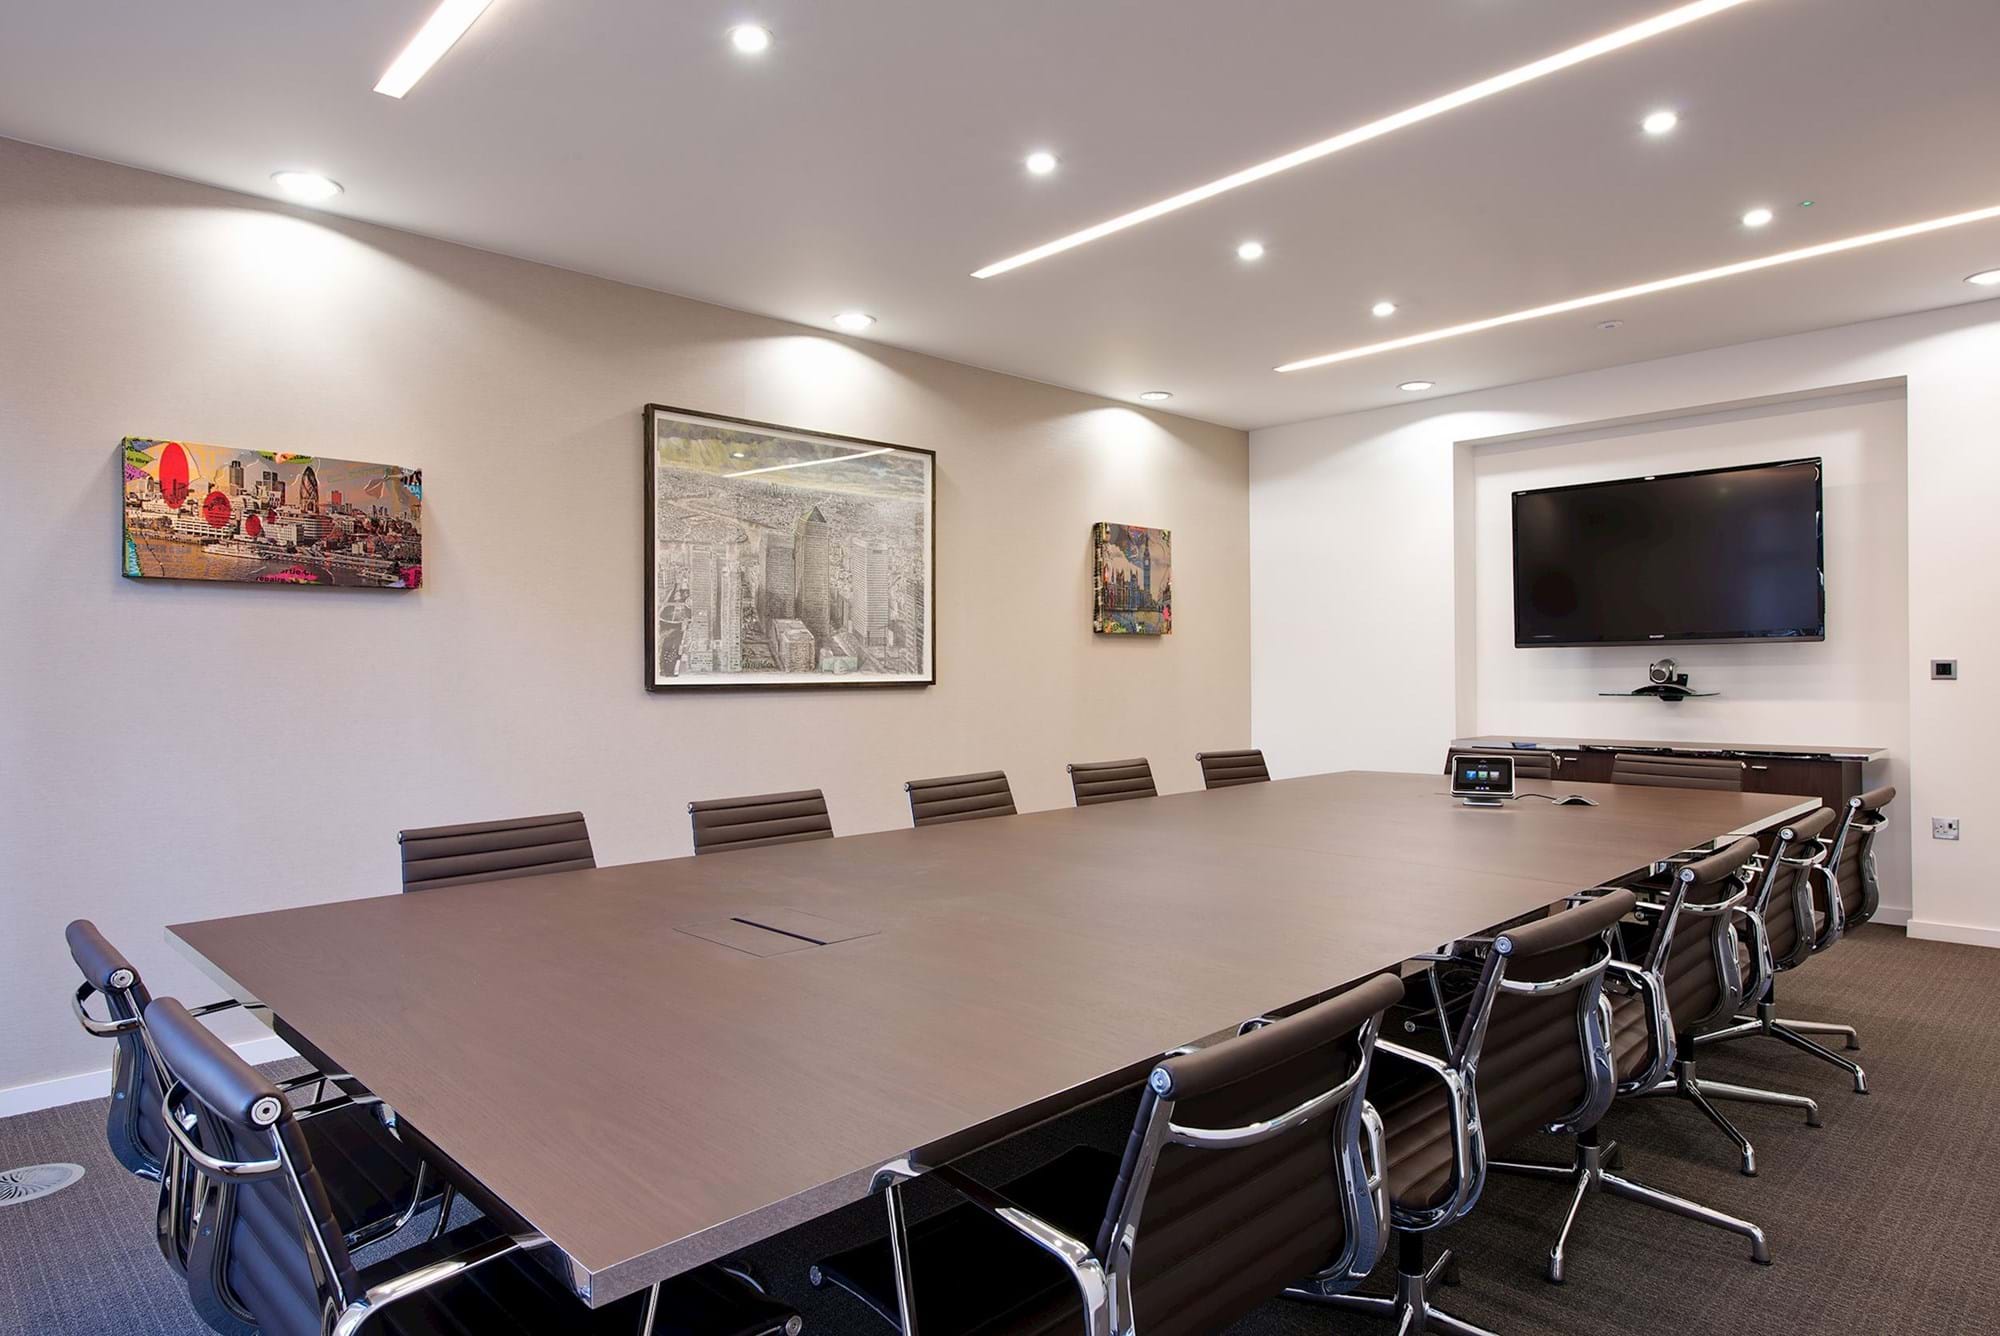 Modus Workspace office design, fit out and refurbishment - Starwood Capital - Meeting Room - Starwood08_highres_sRGB.jpg